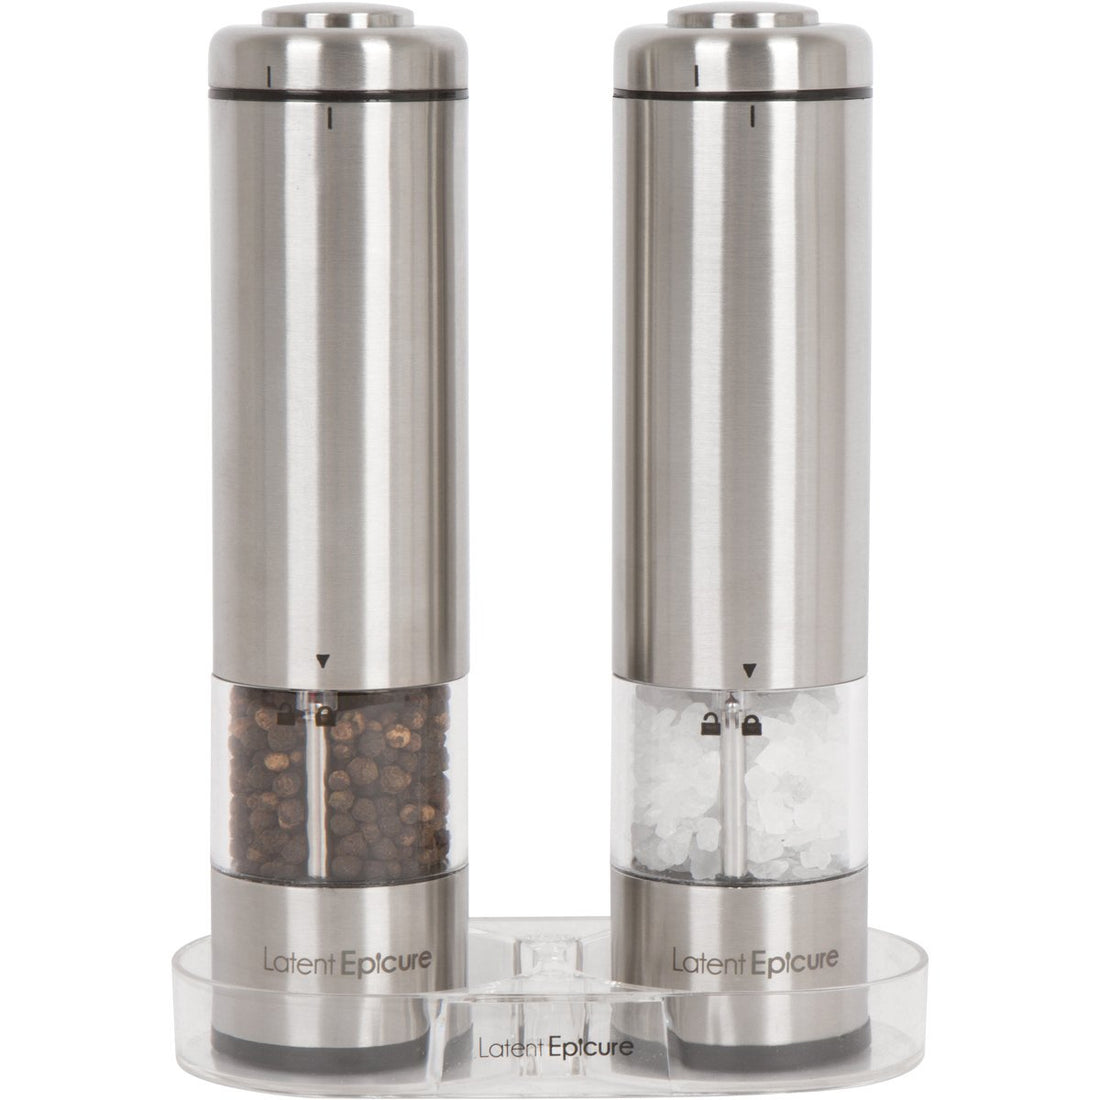 Pack of 2 : Latent Epicure Battery Operated Salt and Pepper Grinder Set (Pack of 2 Mills) - Complimentary Mill Rest | LED Light | Adjustable Coarseness |